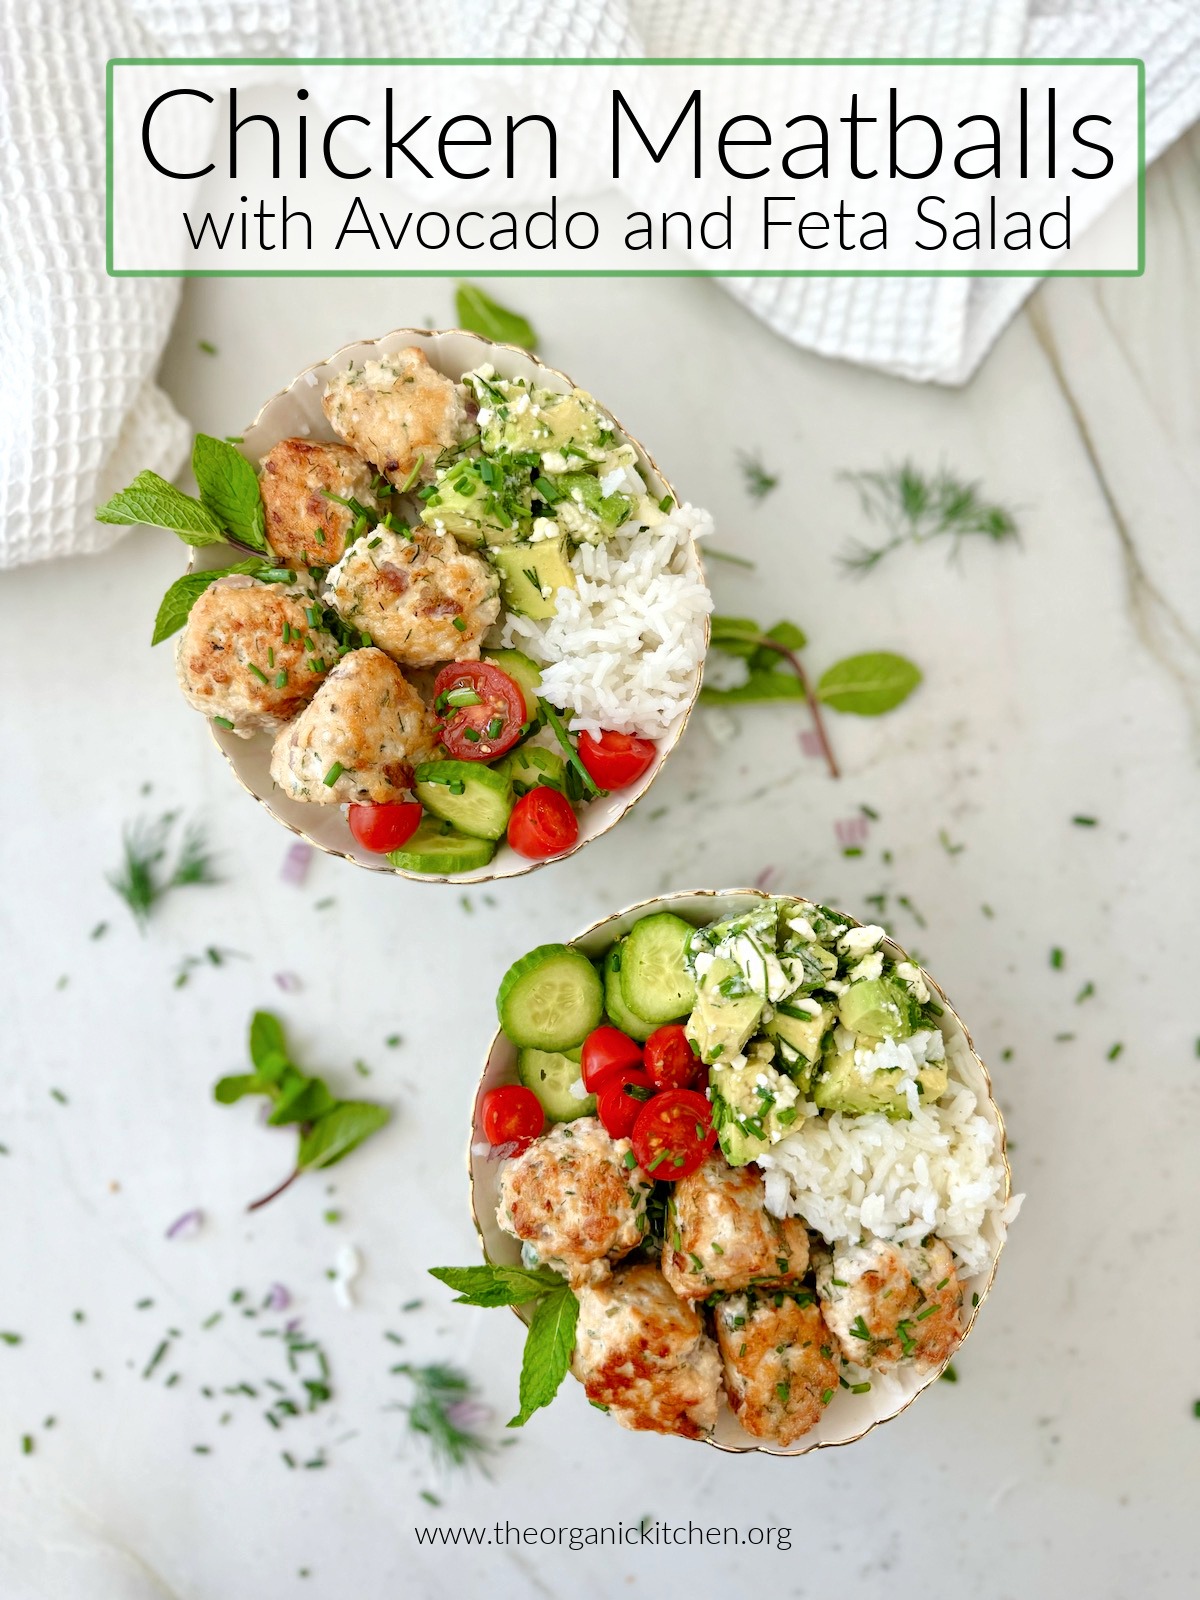 Chicken Meatballs with Avocado and Feta Salad in two bowls on marble surface, surrounded by herbs